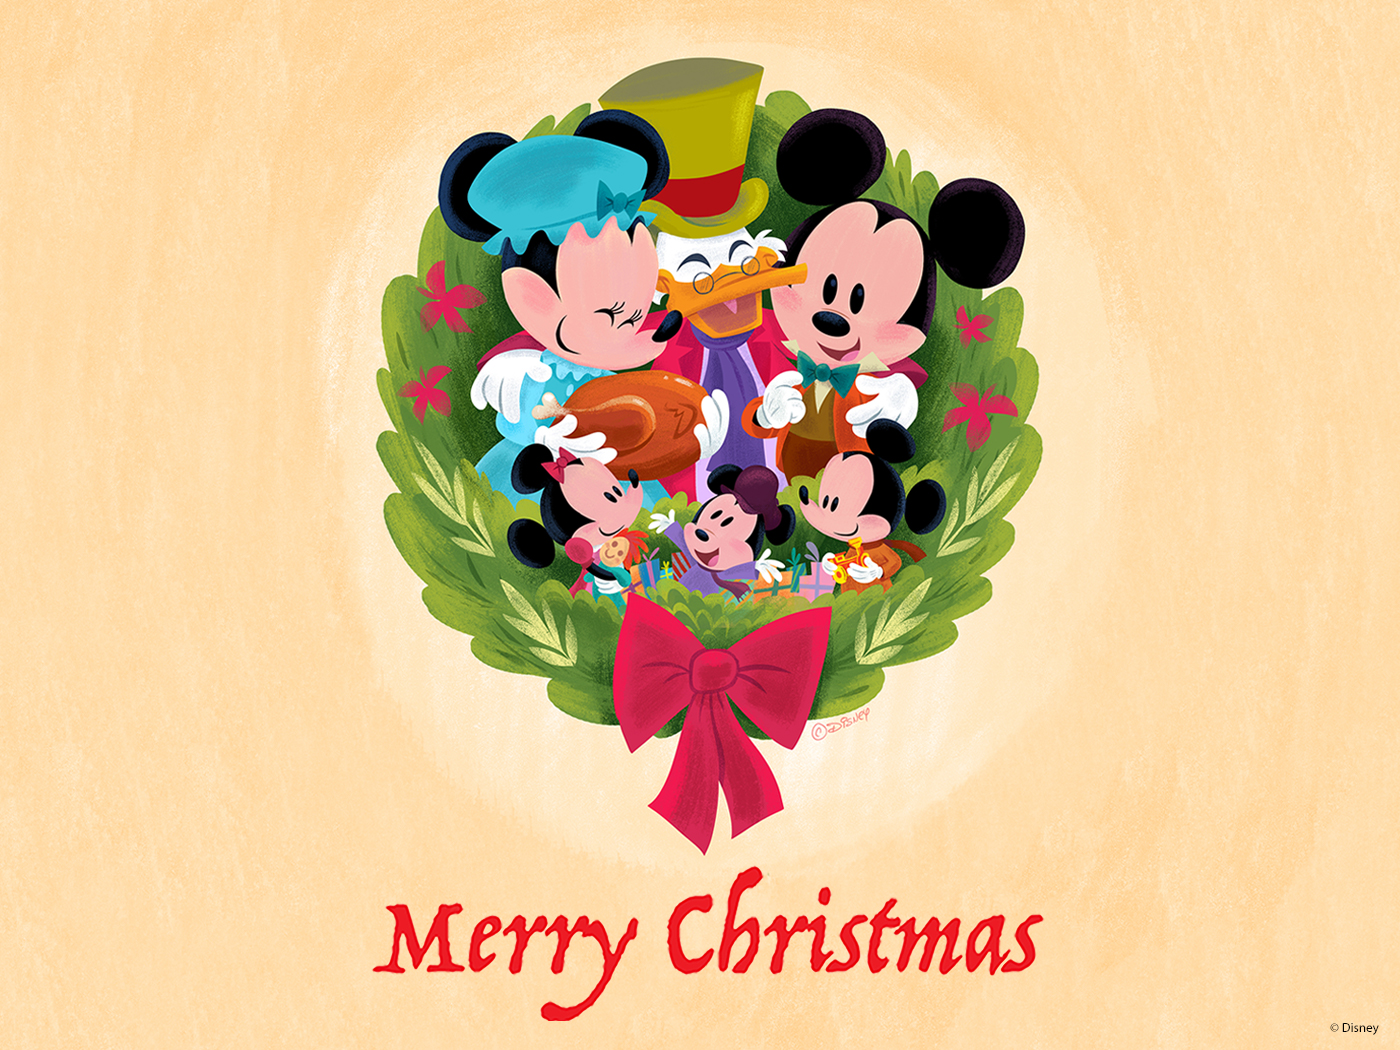 Download These Special Holiday Wallpapers Designed by Disney